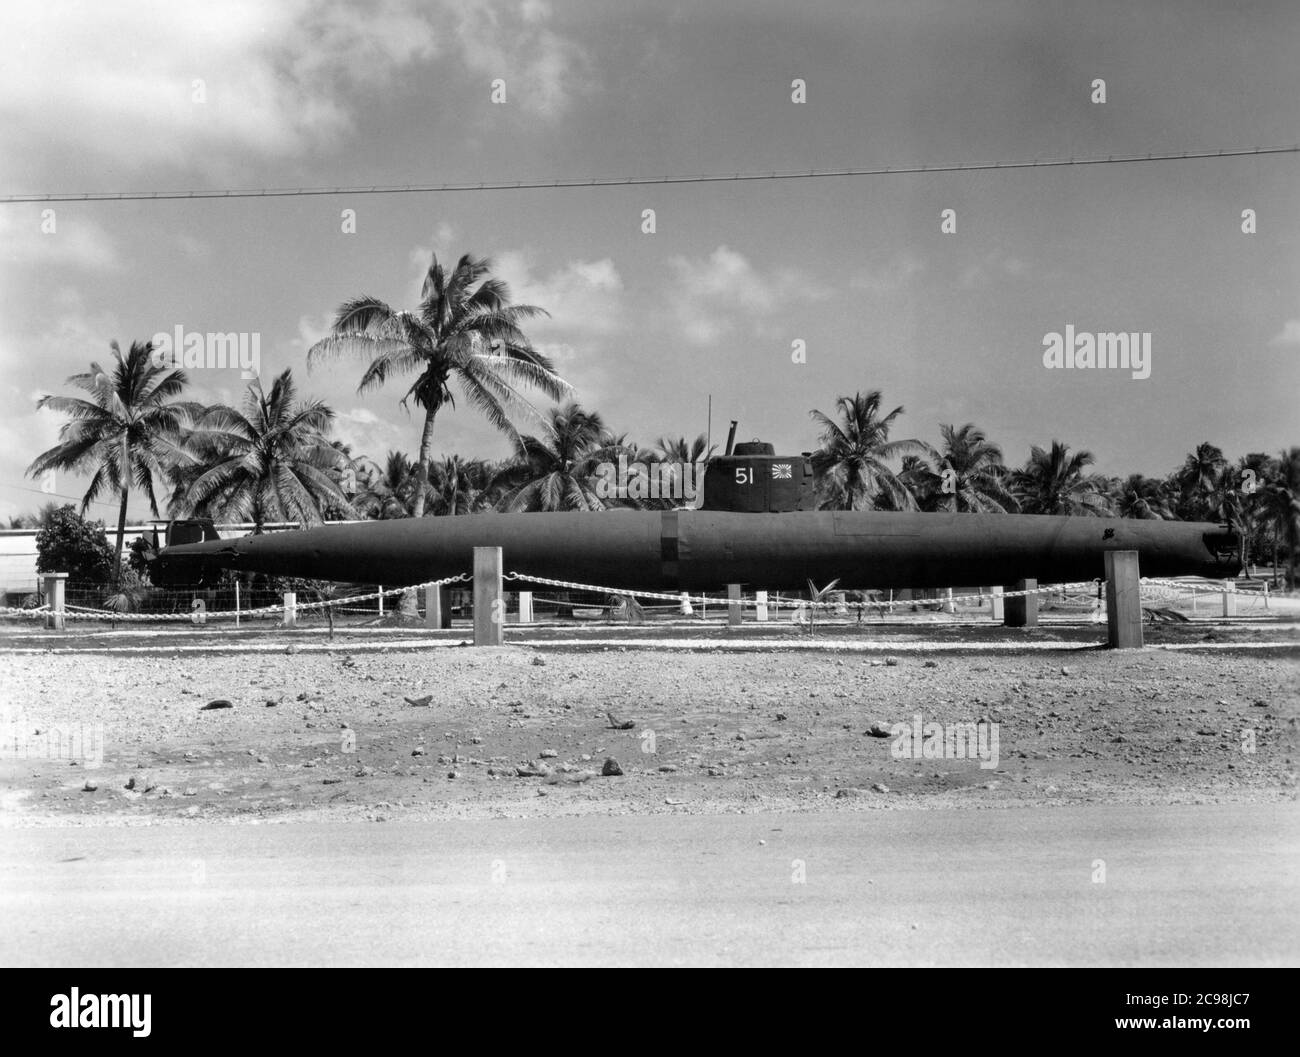 Japanese mini submarine number HA-51 at Camp Dealey Submarine Recuperation Camp. Guam, July 1945. As the 75th anniversary of V-J Day approaches, The Consoli Collection has published four photo essays by U.S. Navy Lt. (j.g.) Joseph J. Consoli. The photos were taken between July and December 1945 in the Mariana Islands. They document U.S. Navy life before and after the Japanese surrender. Stock Photo